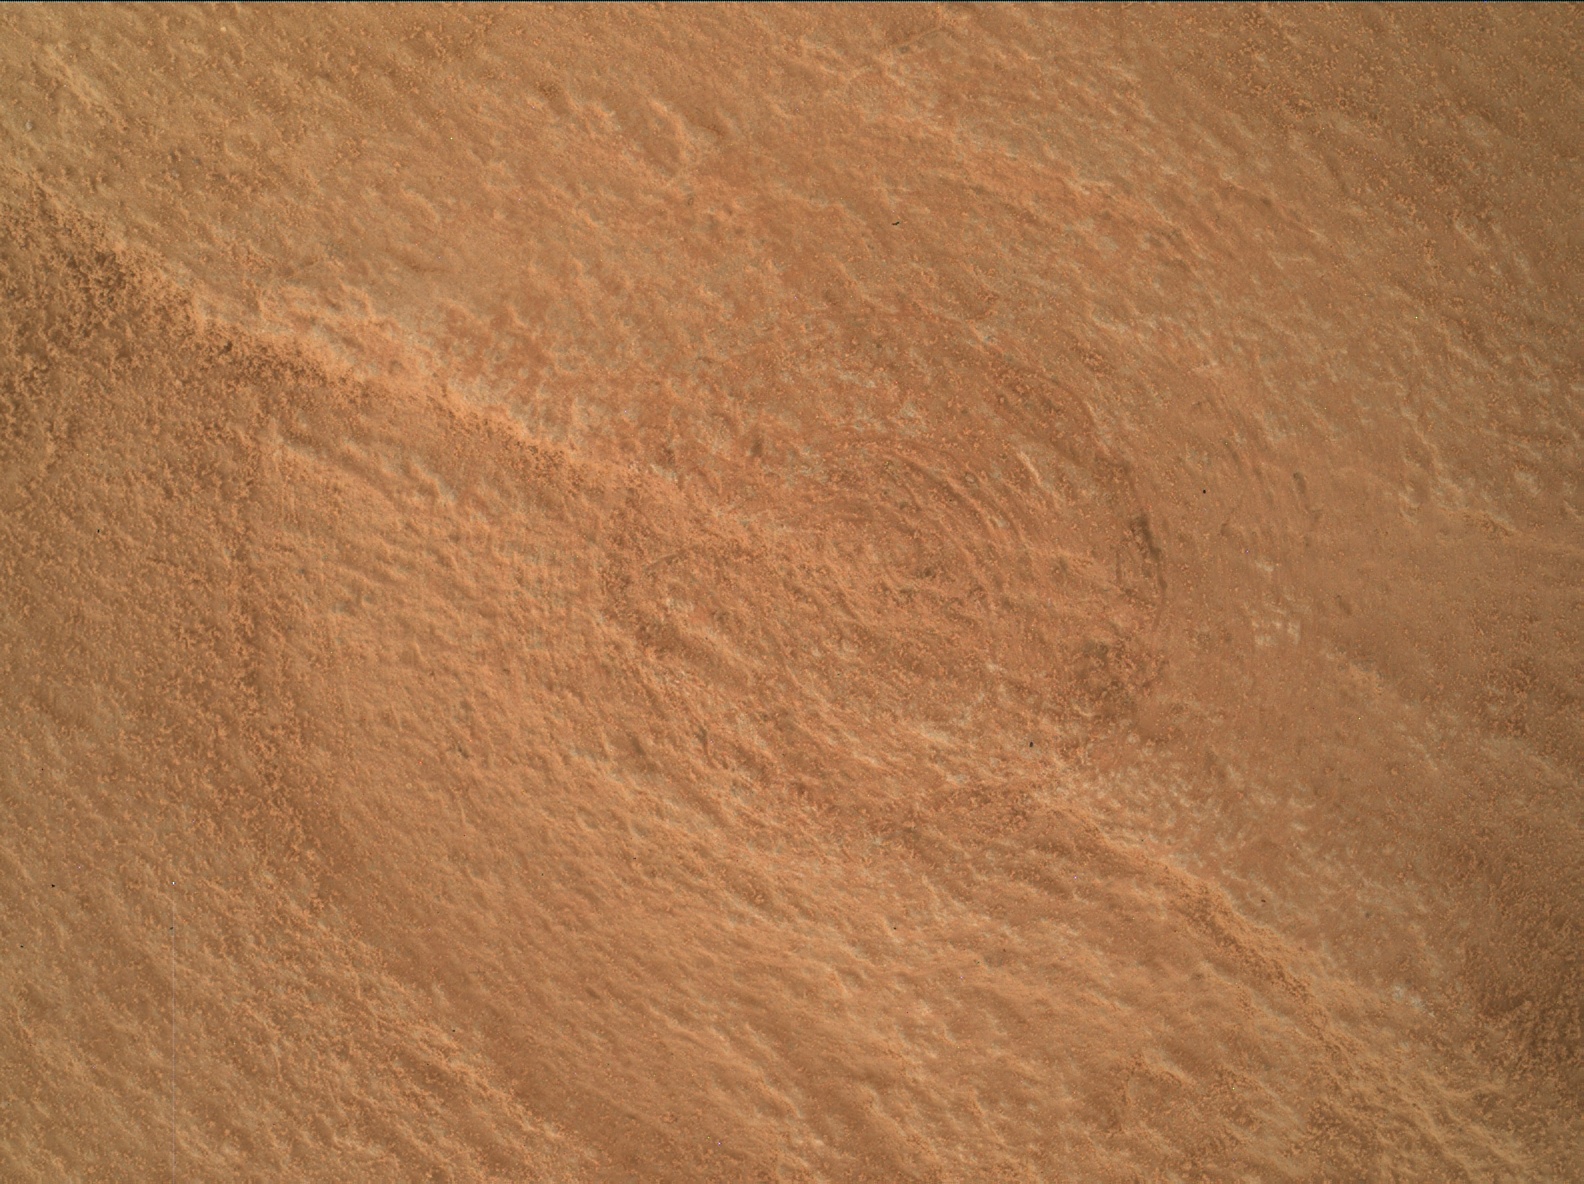 Nasa's Mars rover Curiosity acquired this image using its Mars Hand Lens Imager (MAHLI) on Sol 3210